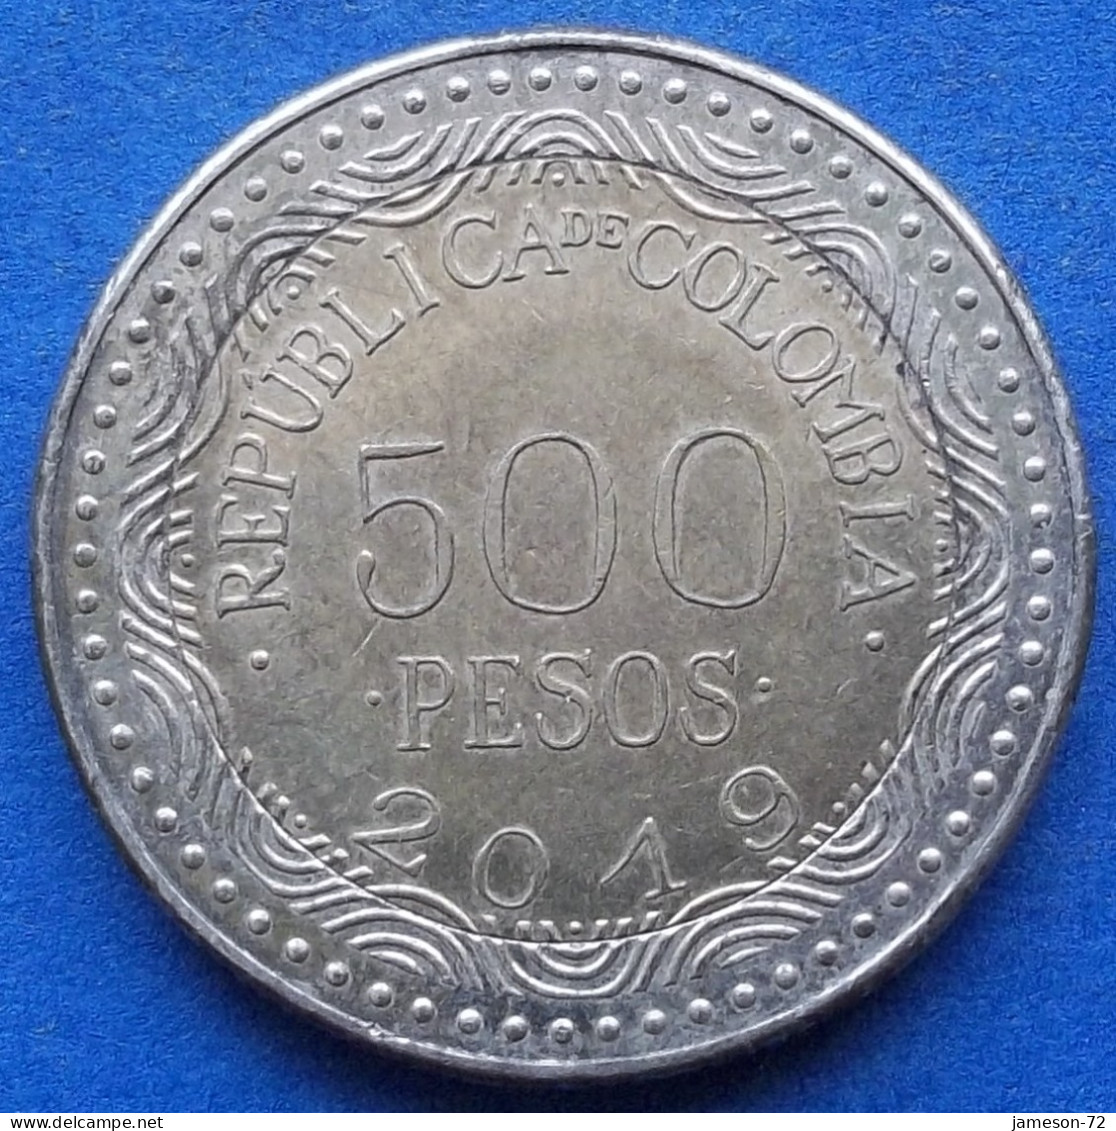 COLOMBIA - 500 Pesos 2019 "Glass Frog" KM# 298 Republic - Edelweiss Coins - Colombia